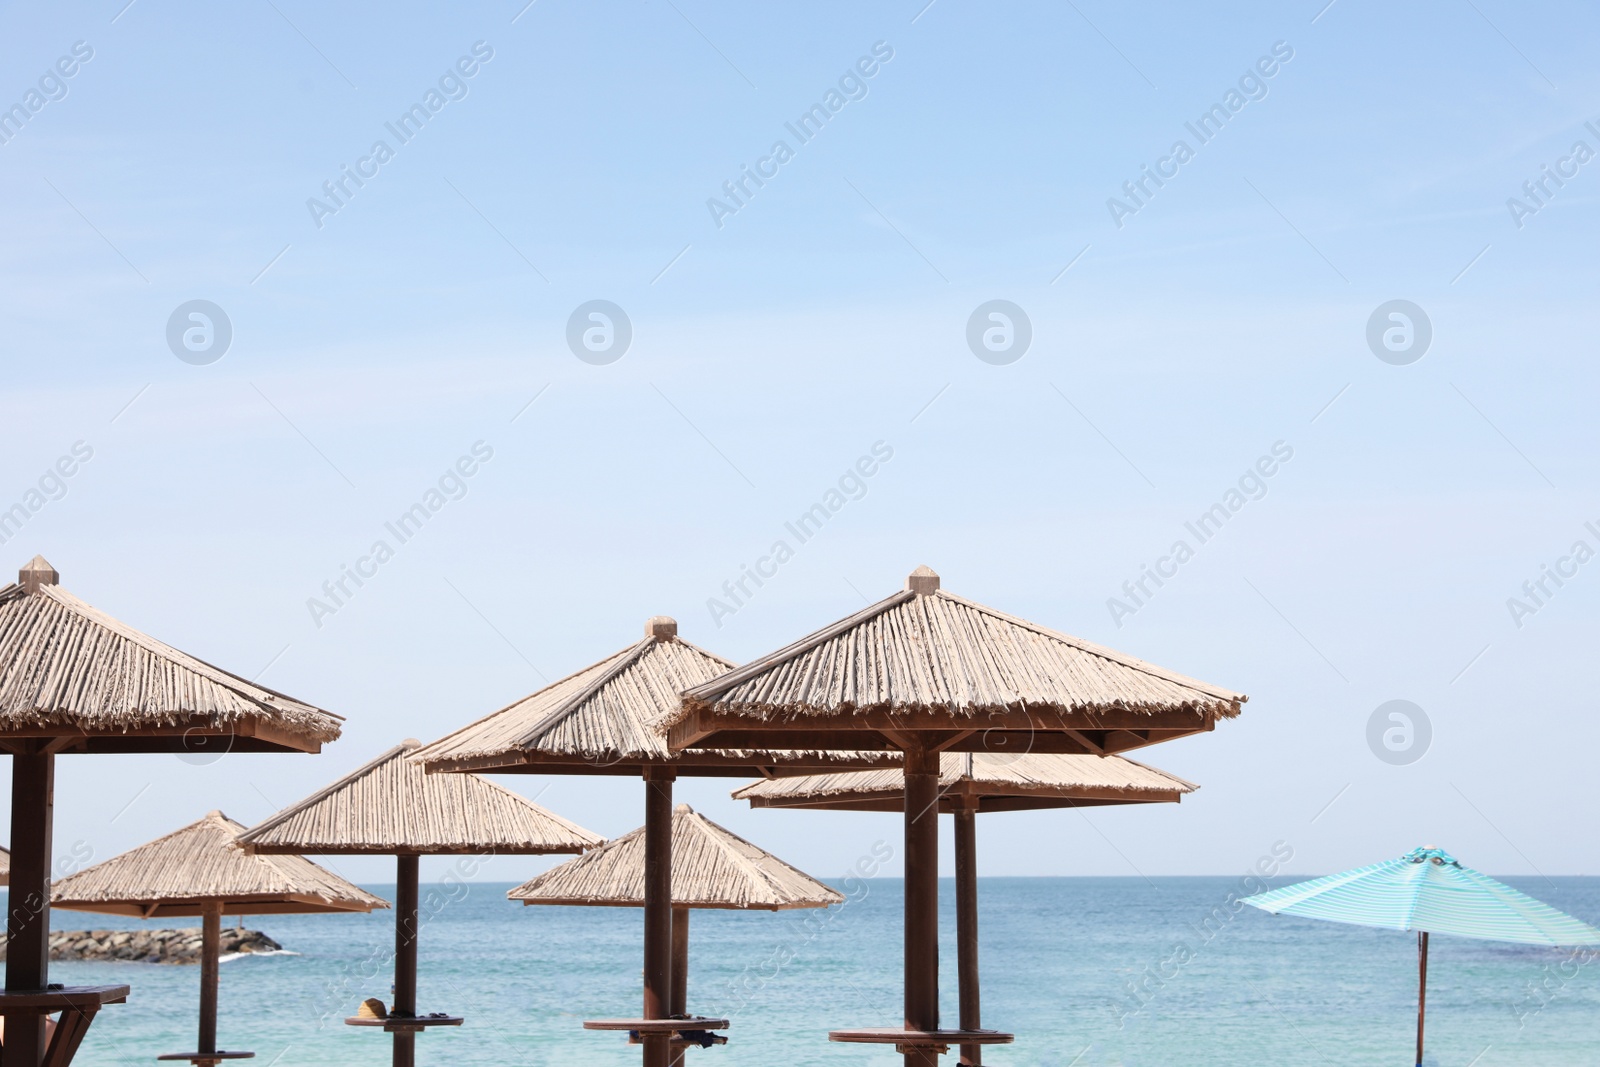 Photo of Beach umbrellas at tropical resort on sunny day